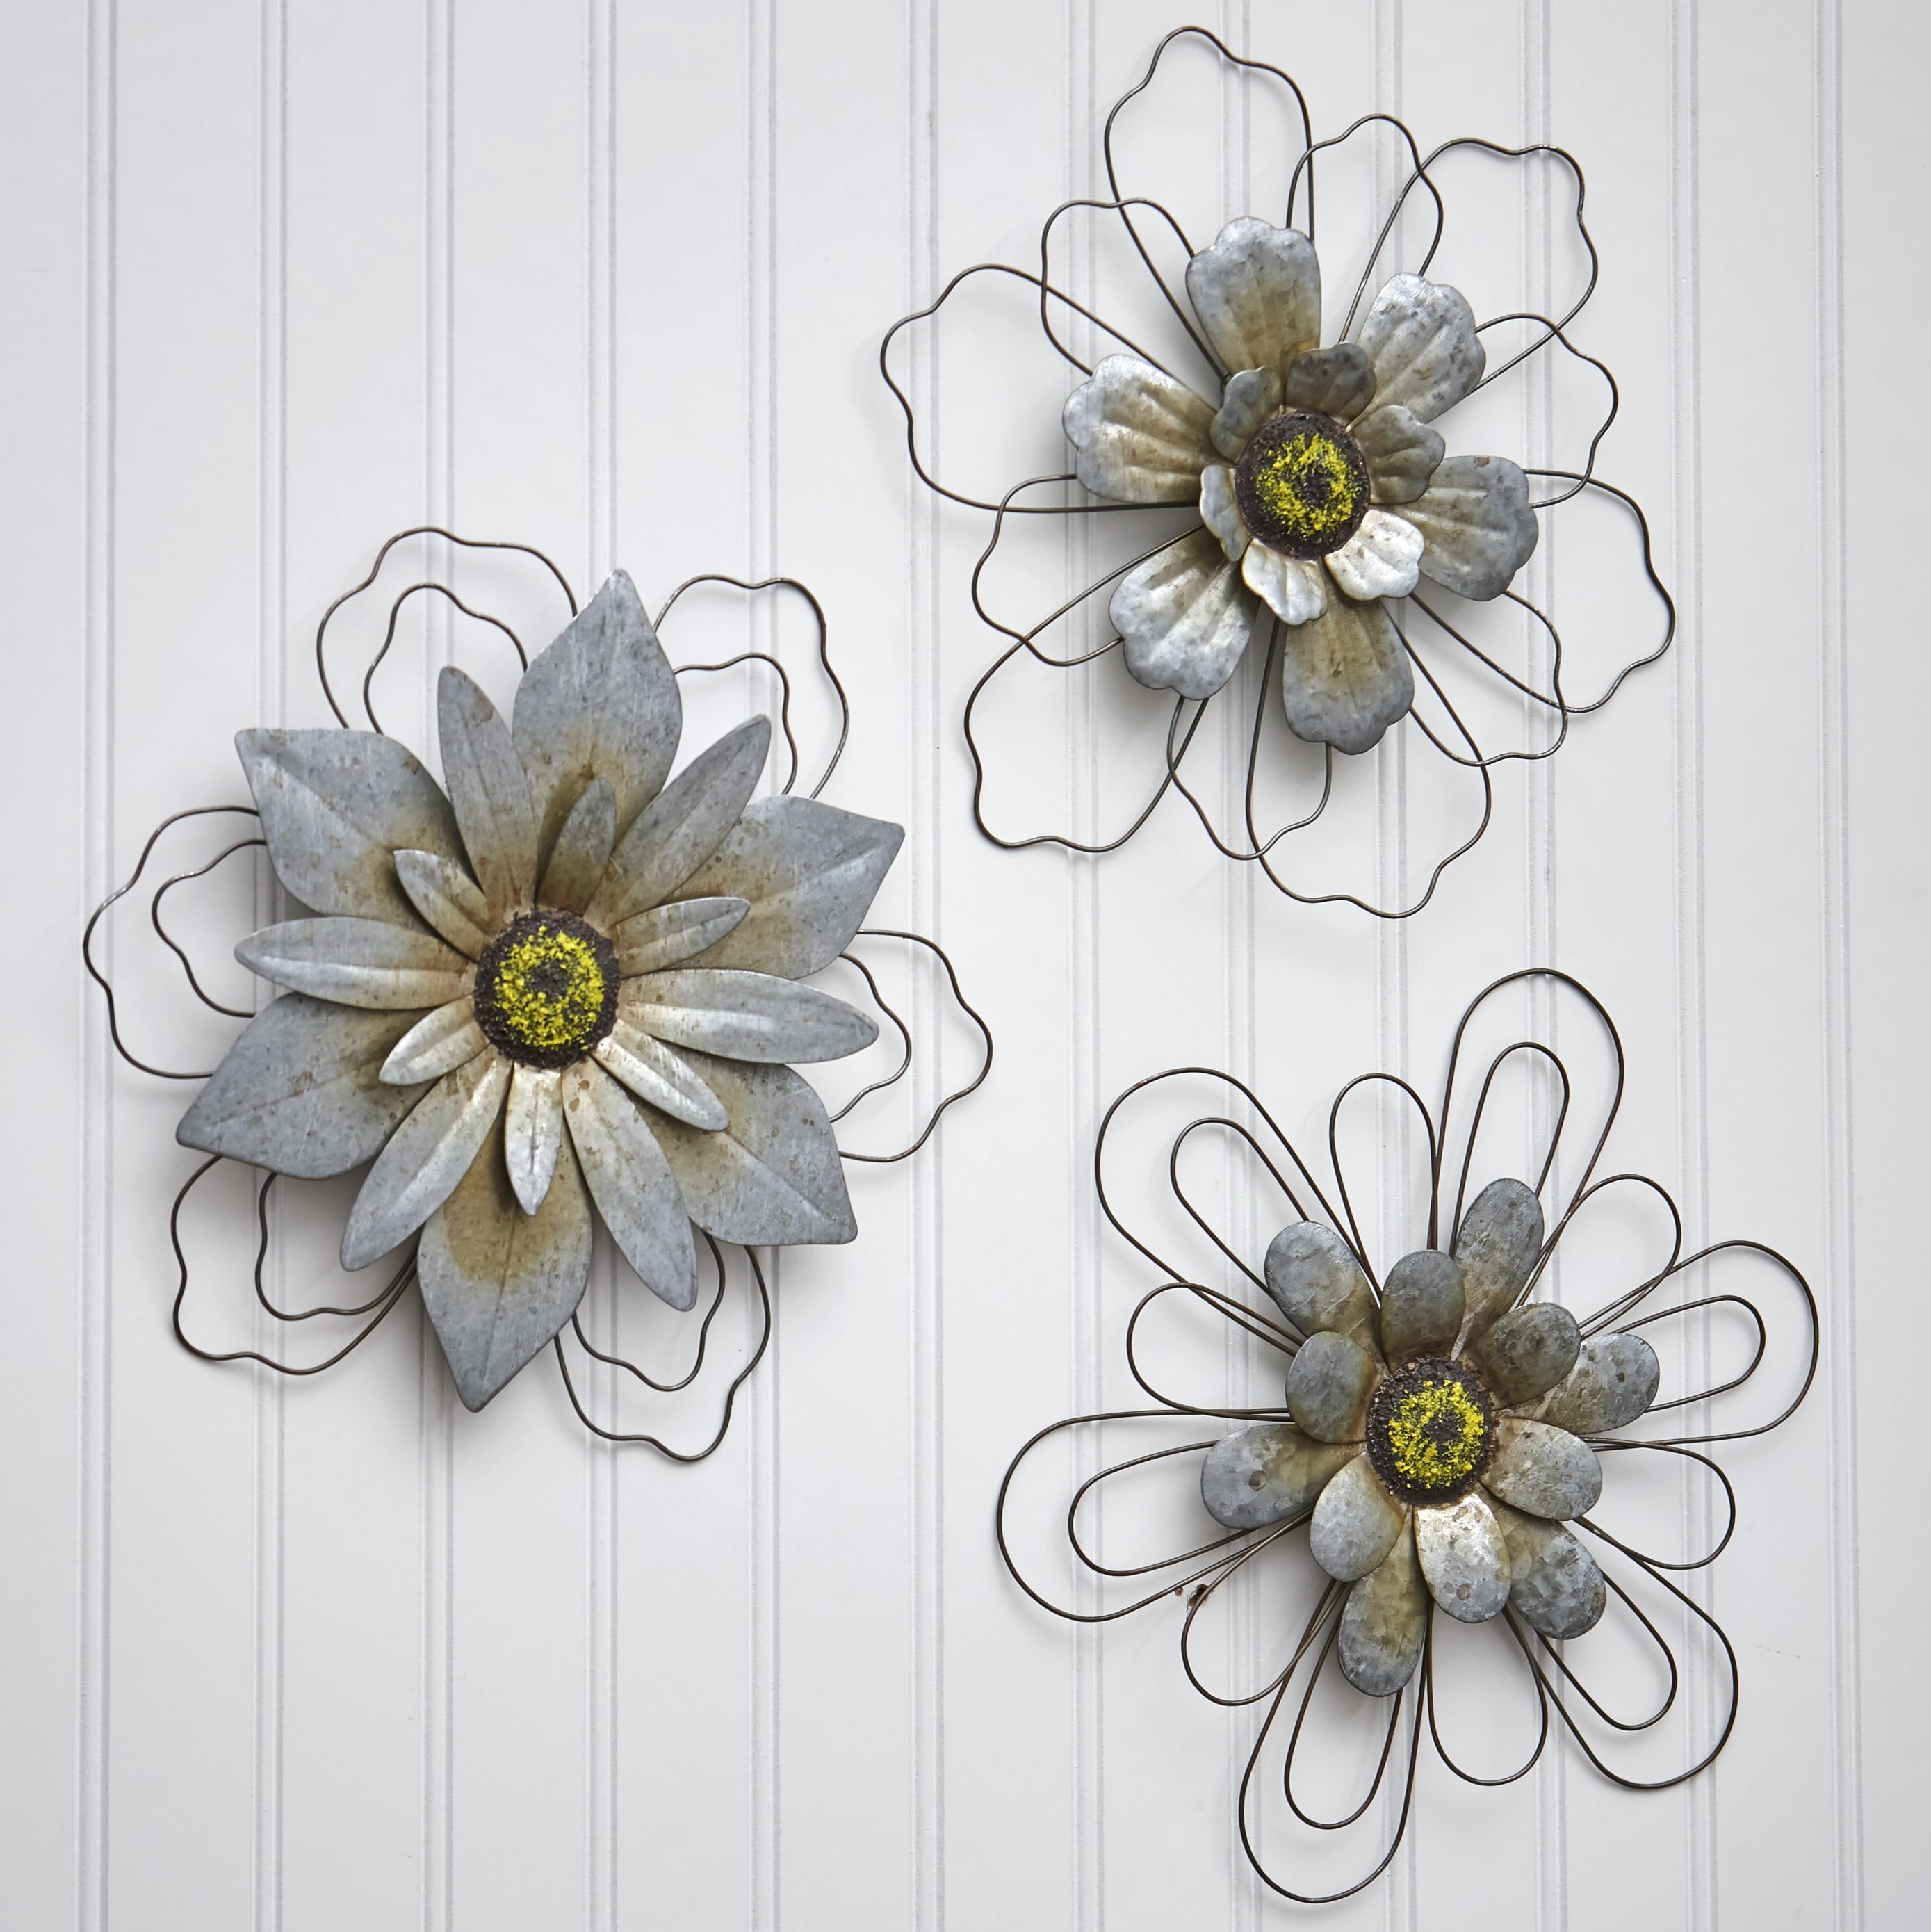 The Lakeside Collection Rustic Galvanized Metal Hanging Wall Flowers Decor Wire Outline Set of 3 